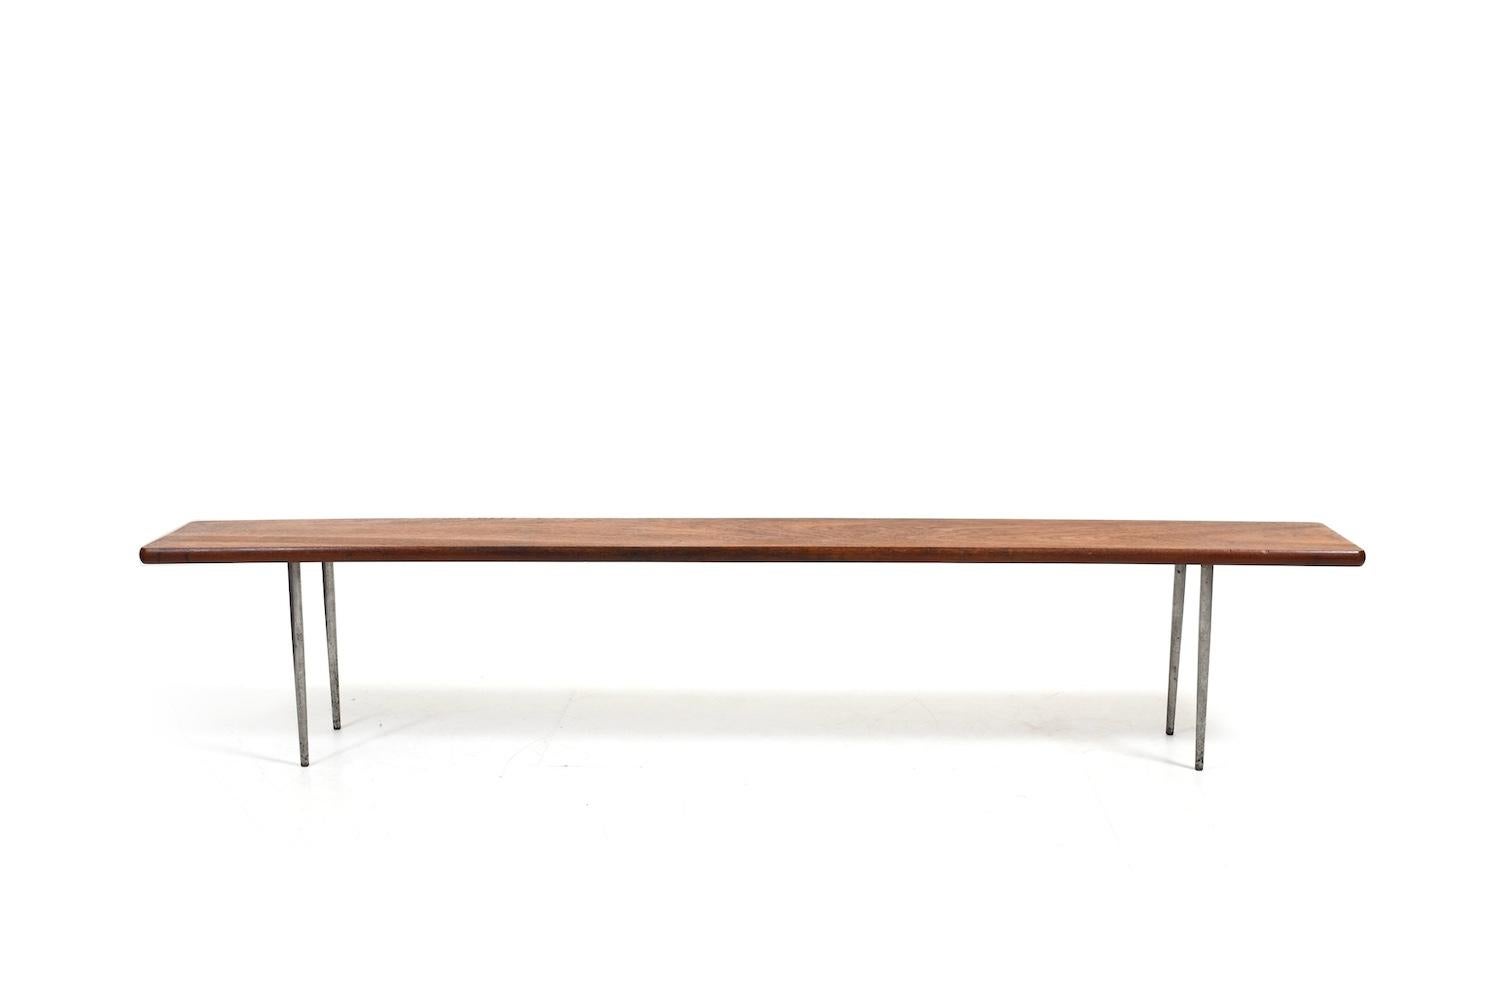 1960s danish bench / shoe bench in teak and conical round steel legs. In very good quality. Denmark 1960s. Looks like a design by Peter Hvidt & Orla Mølgaard.